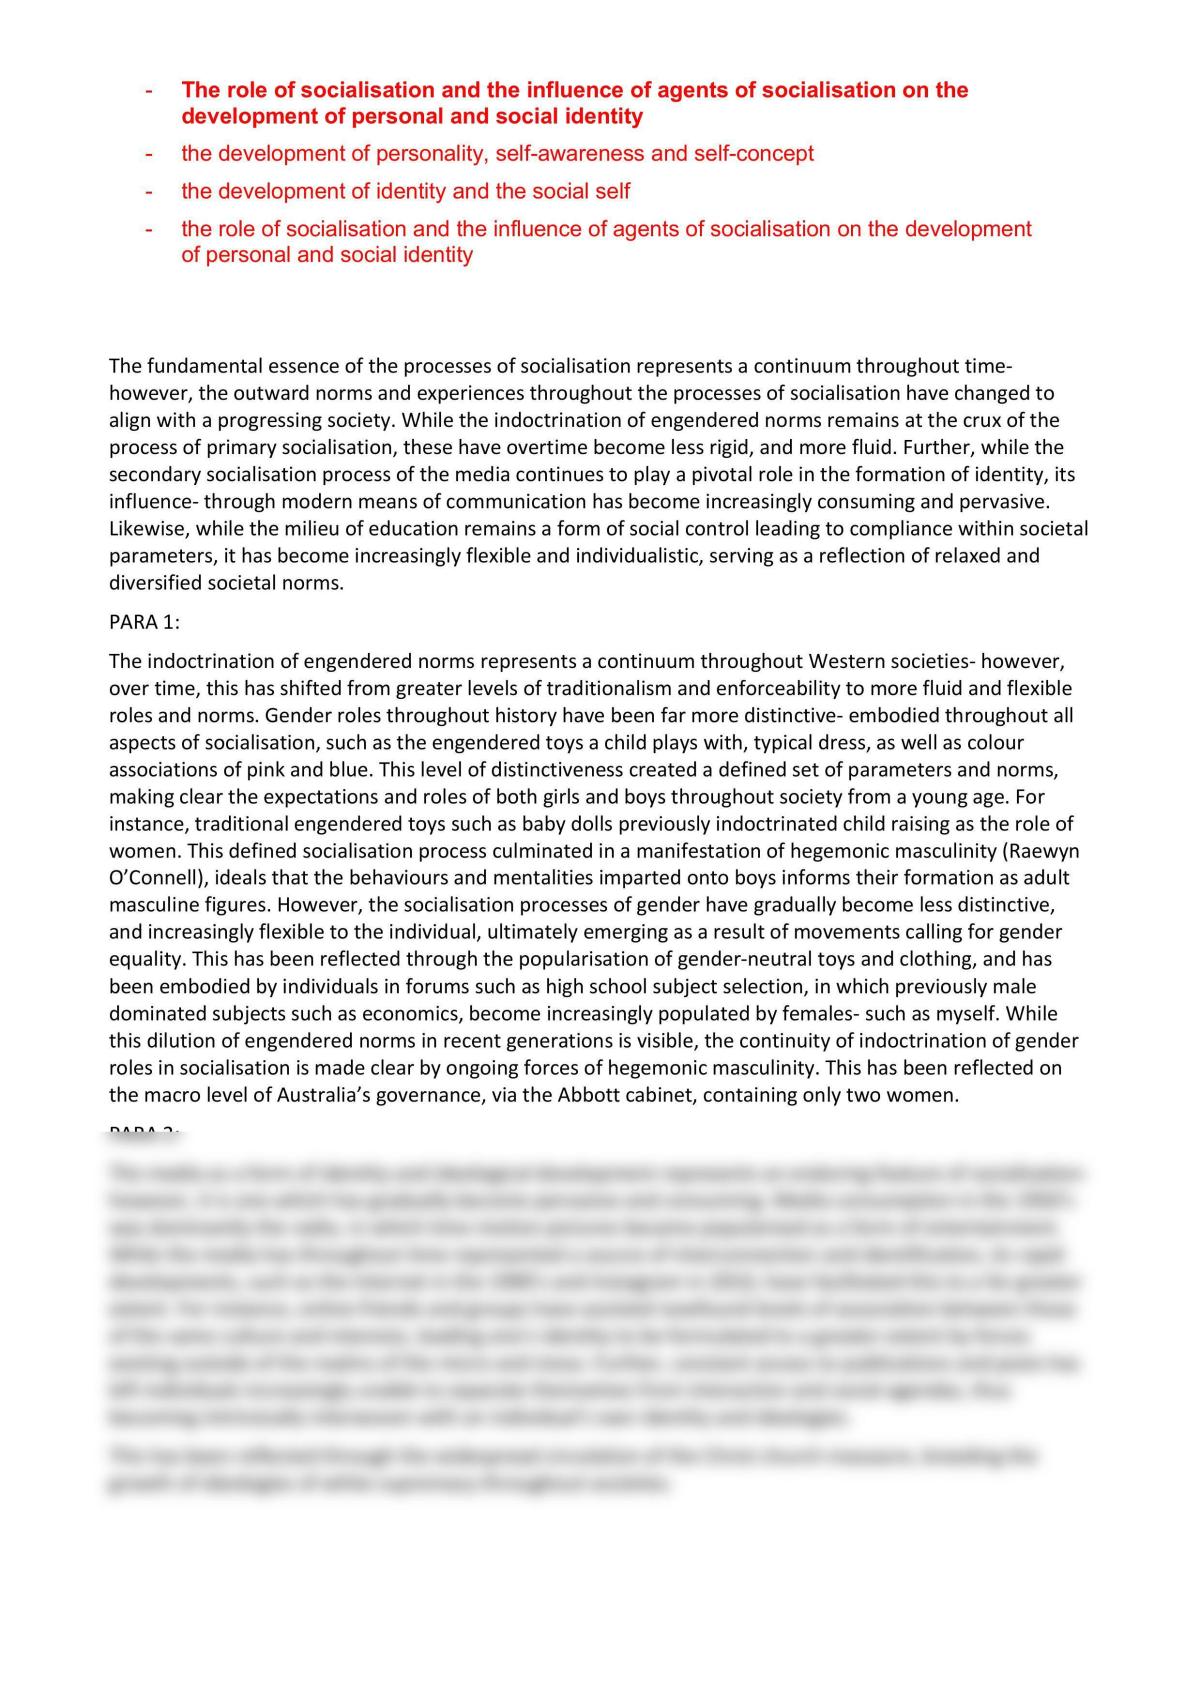 The role of socialisation in the formation of identity - Page 1